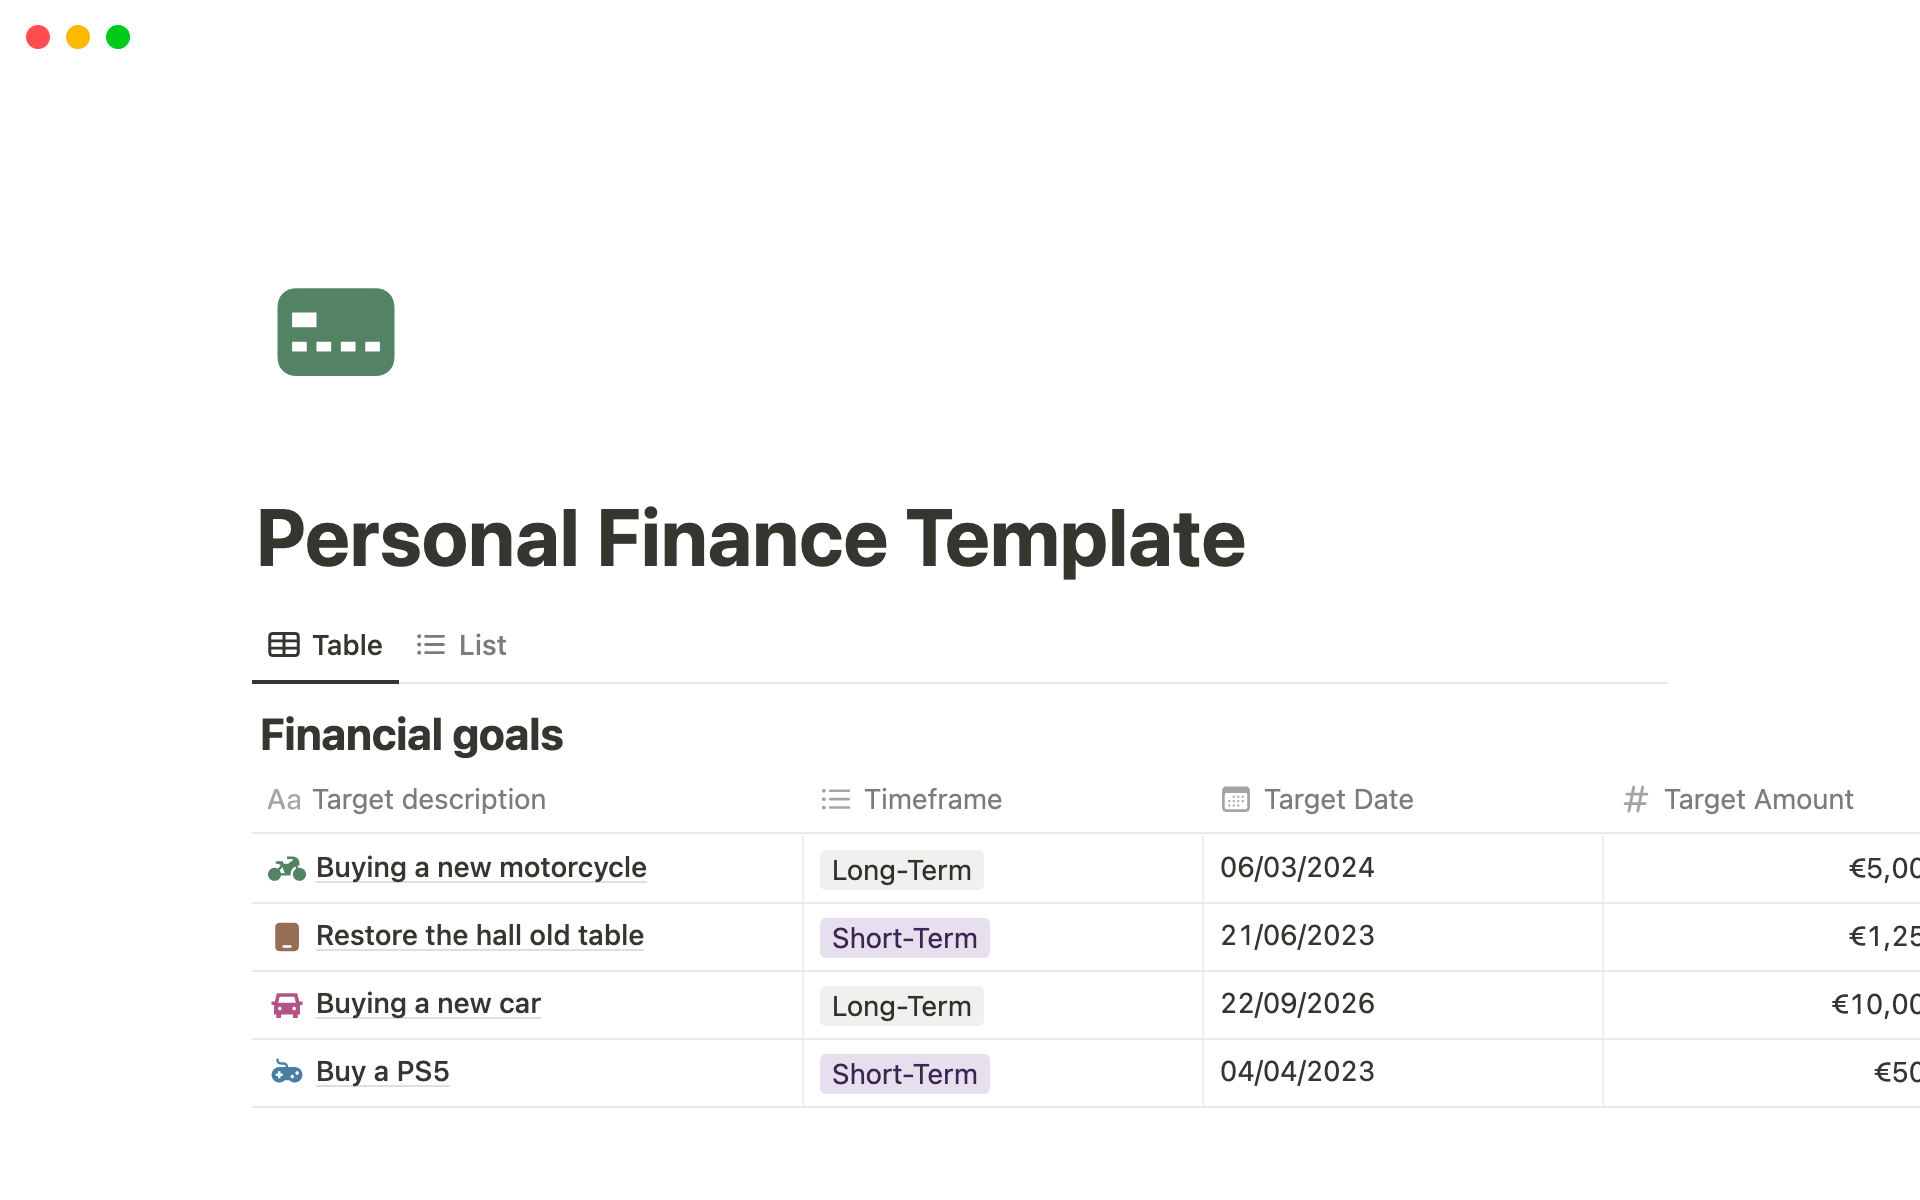 A screenshot of a personal finance plan in Notion.